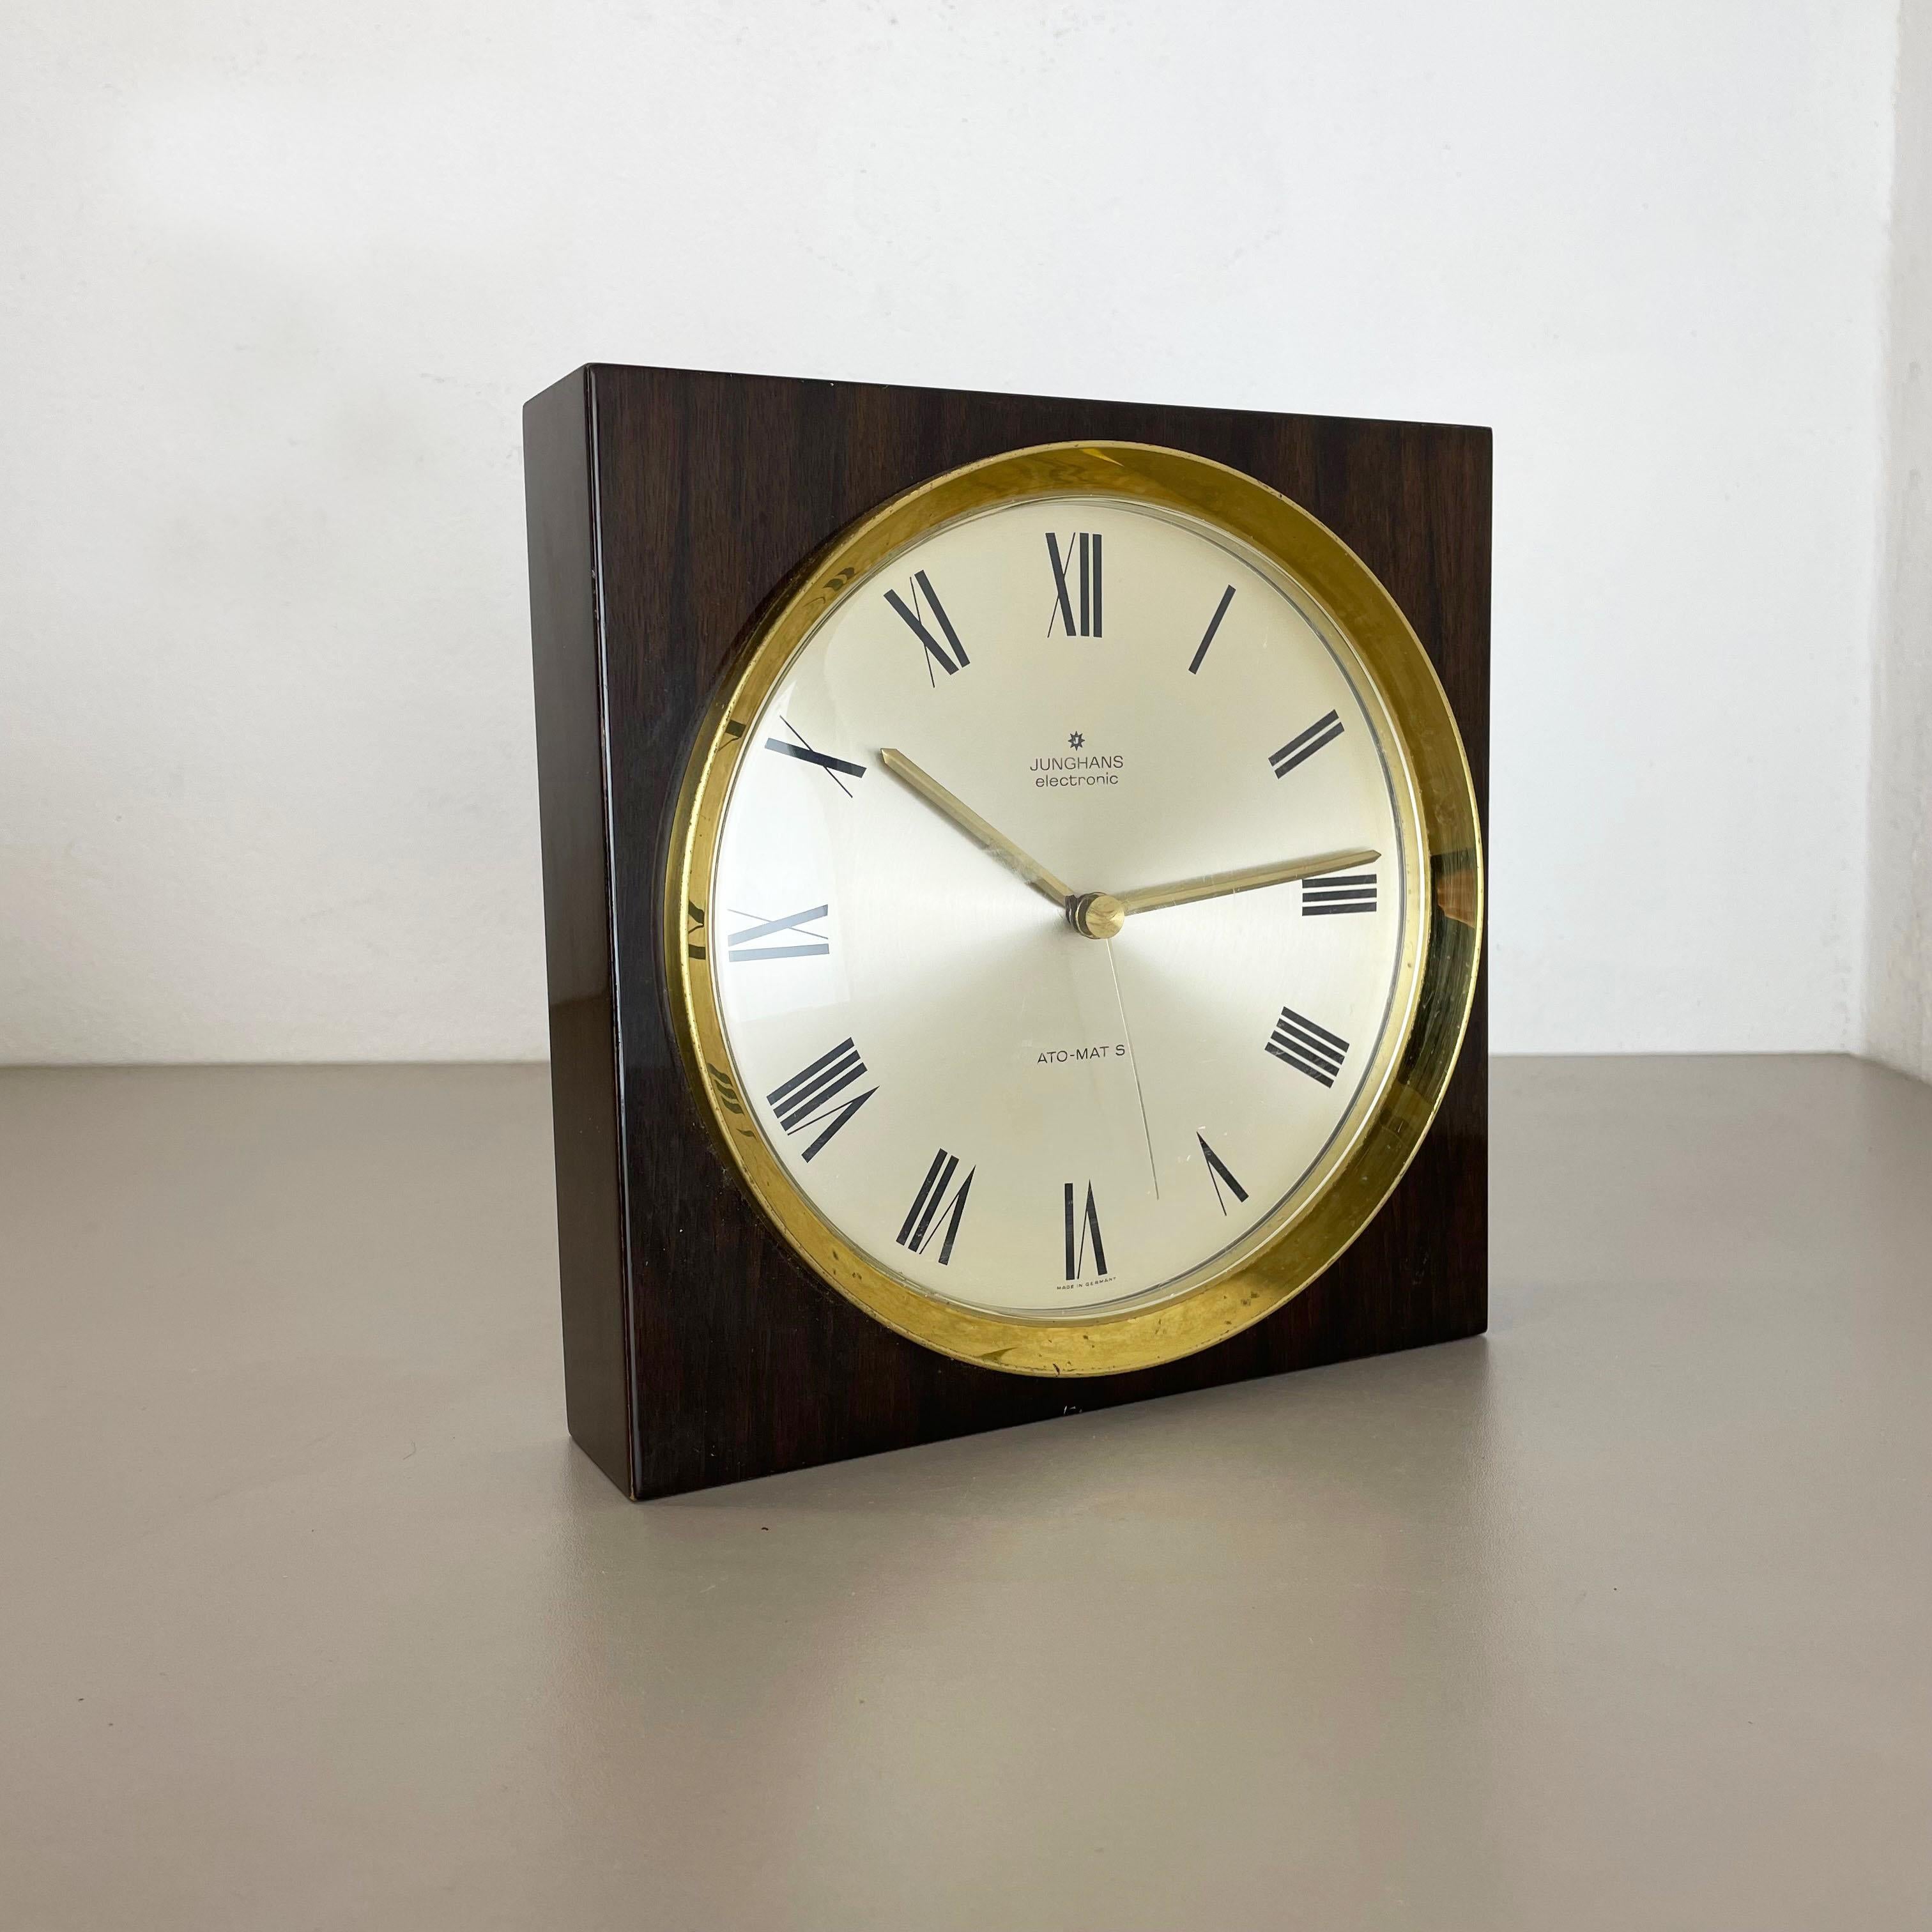 Vintage Modernist Wood + Brass Table and Wall Clock by Junghans, Germany, 1970s For Sale 7